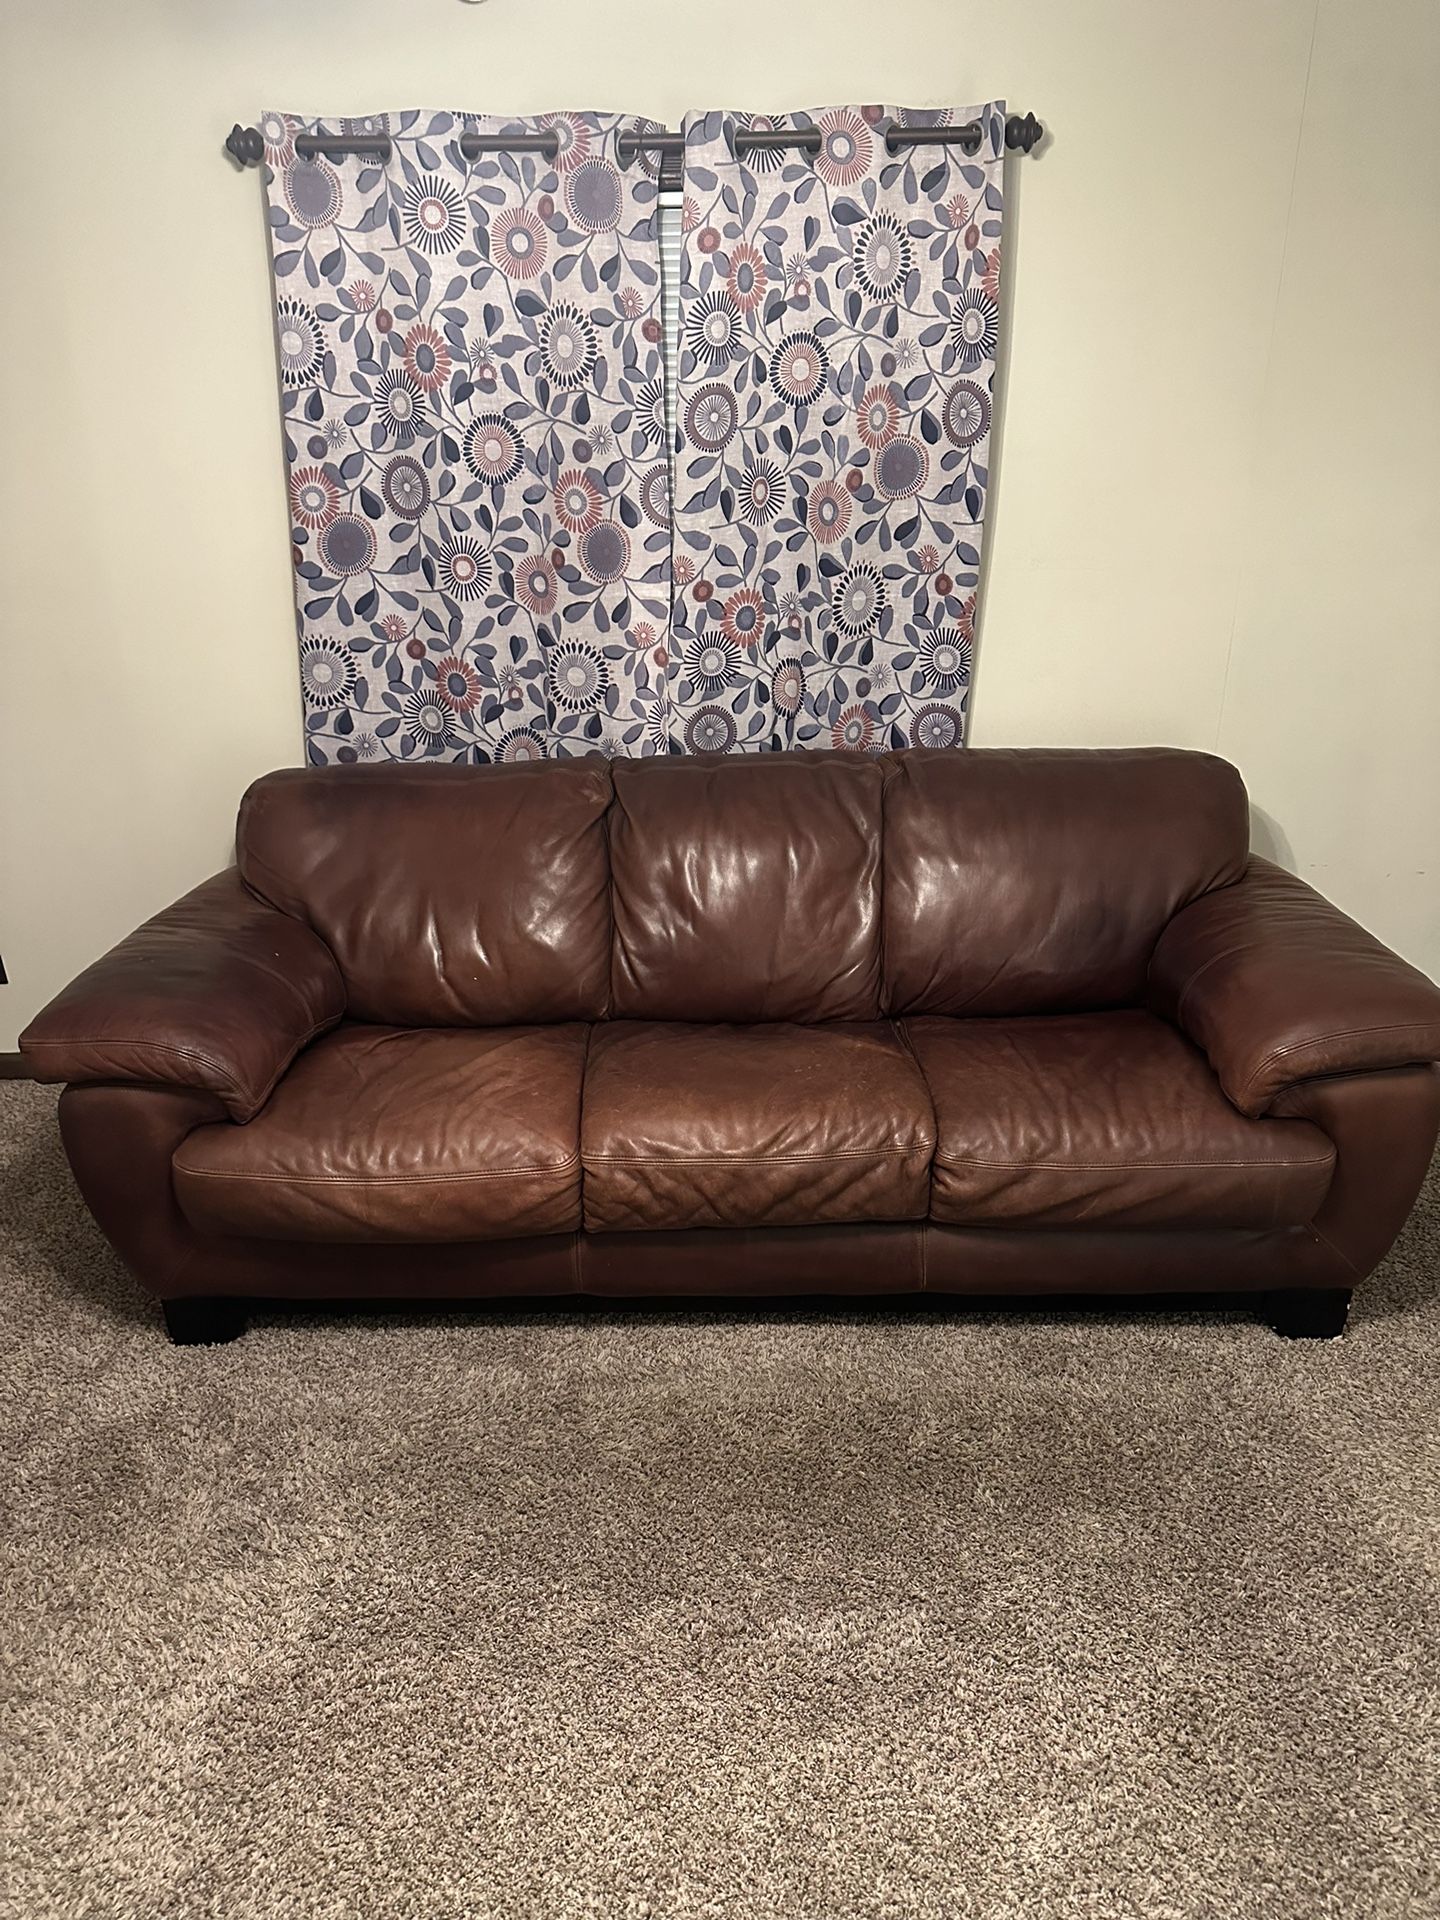 Nice Leather Couch 